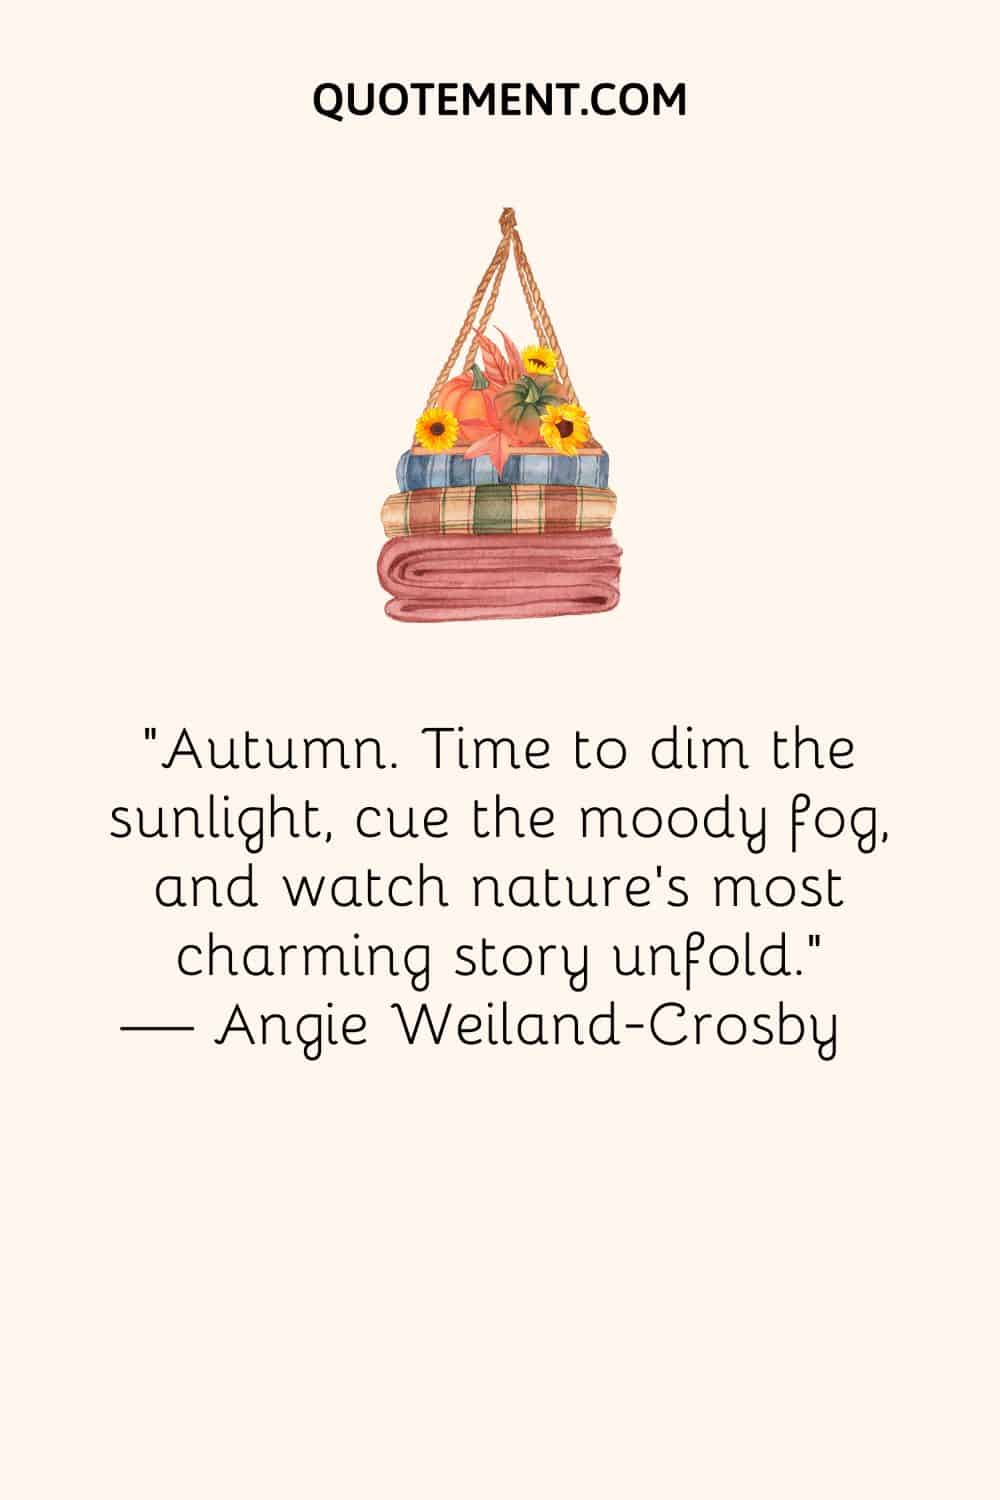 “Autumn. Time to dim the sunlight, cue the moody fog, and watch nature’s most charming story unfold.” — Angie Weiland-Crosby